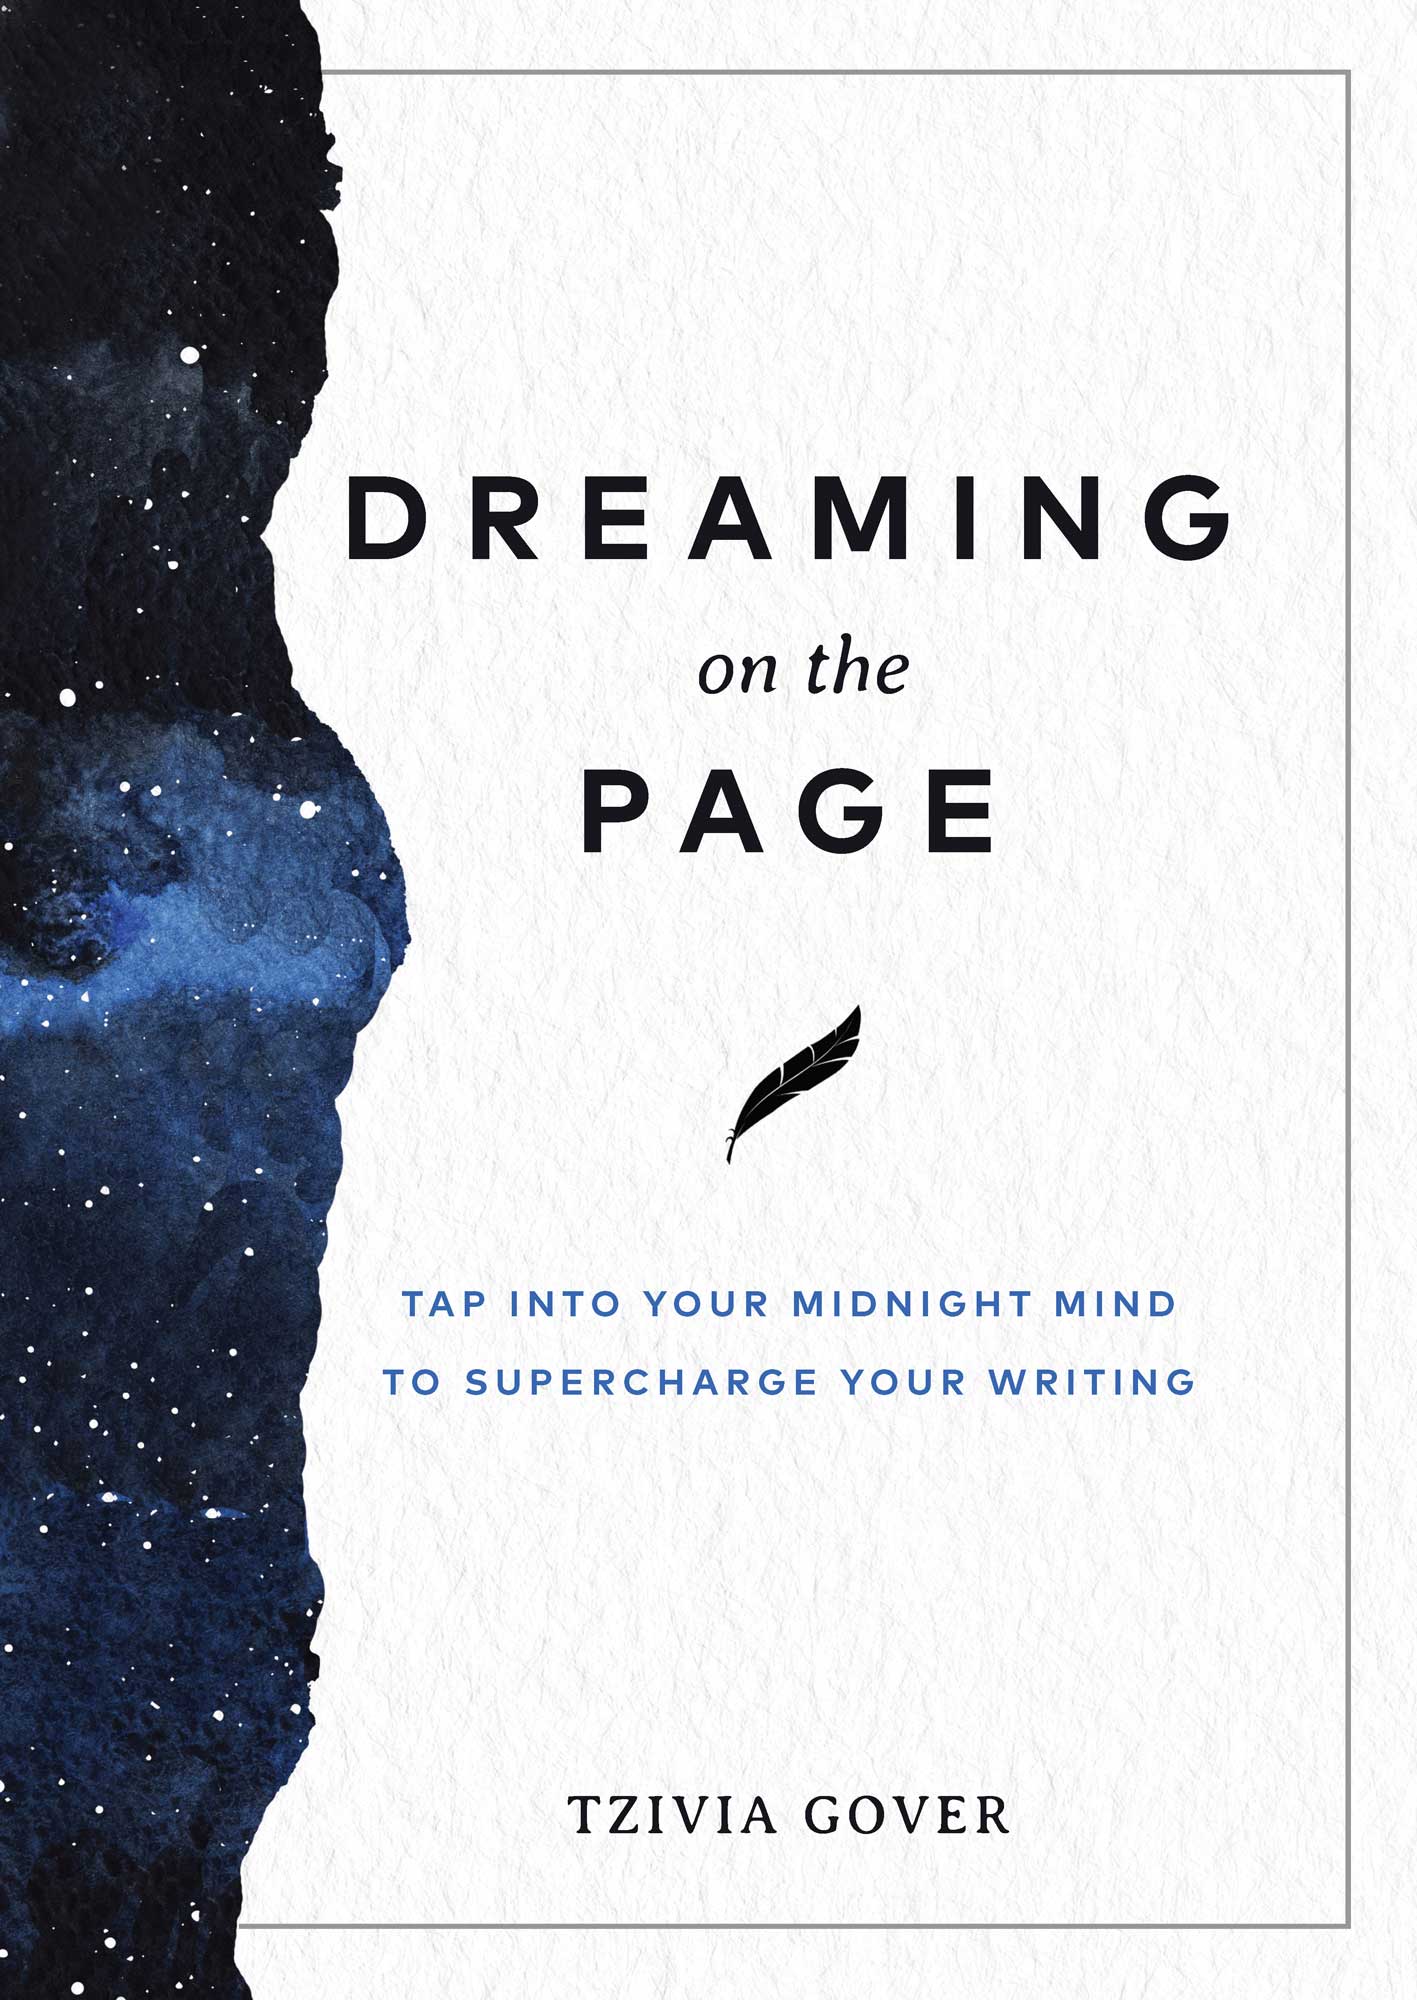 Dreaming on the Page book cover